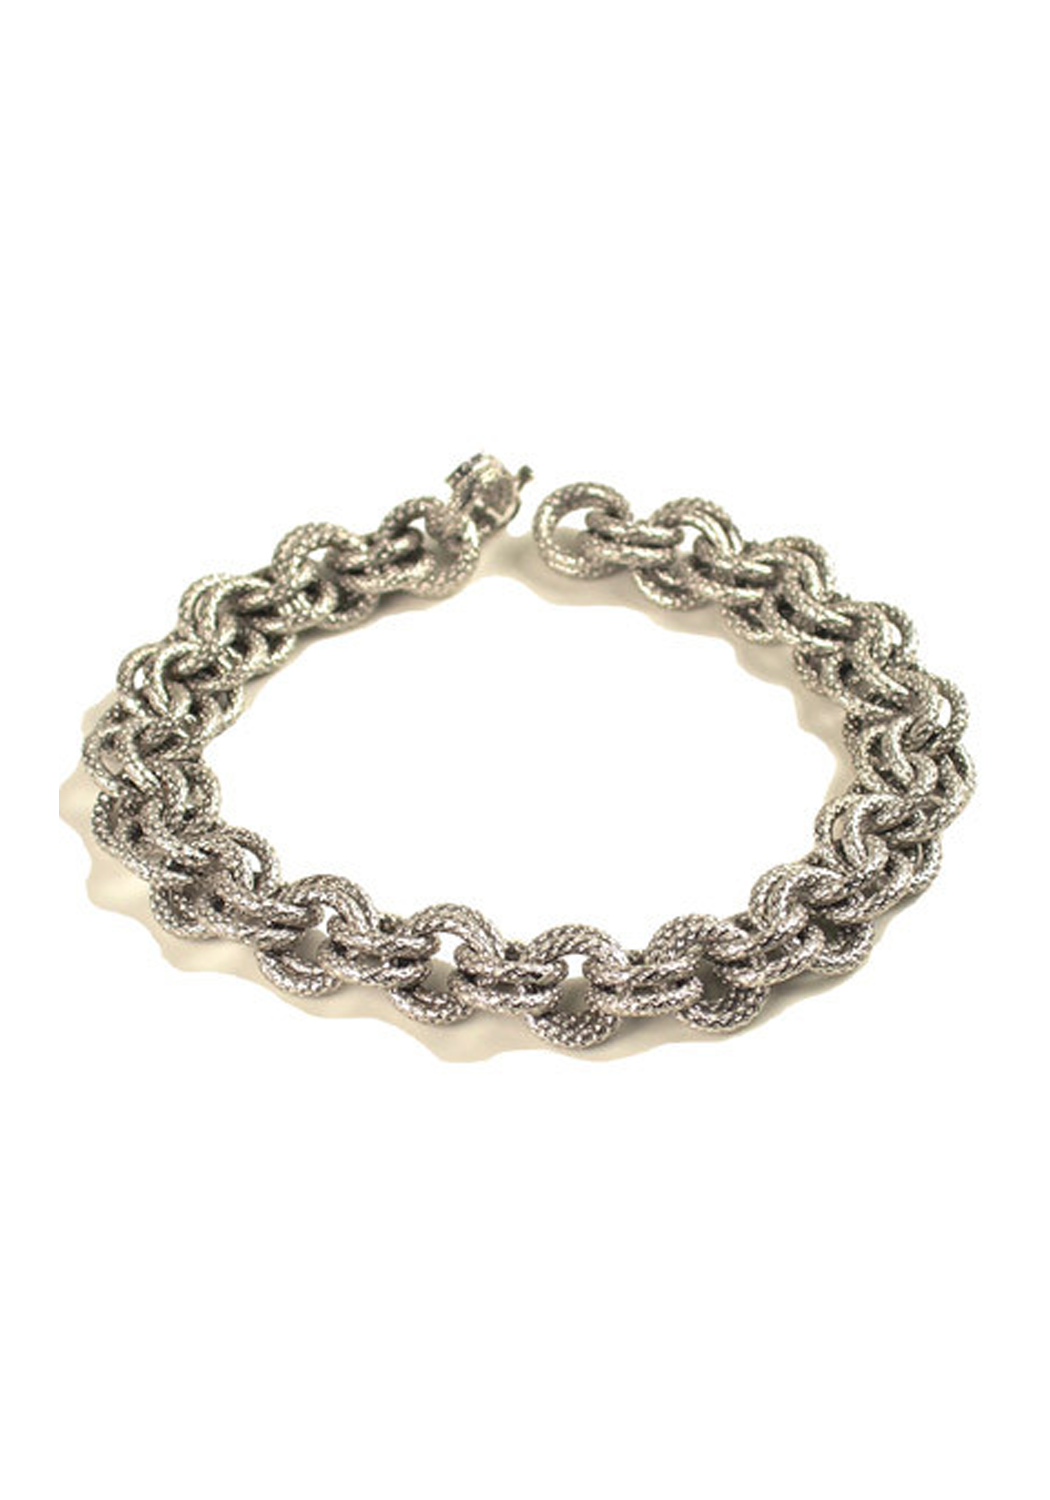 Marchisio Textured 18KWG Rolo Double Link Chain Bracelet | OsterJewelers.com